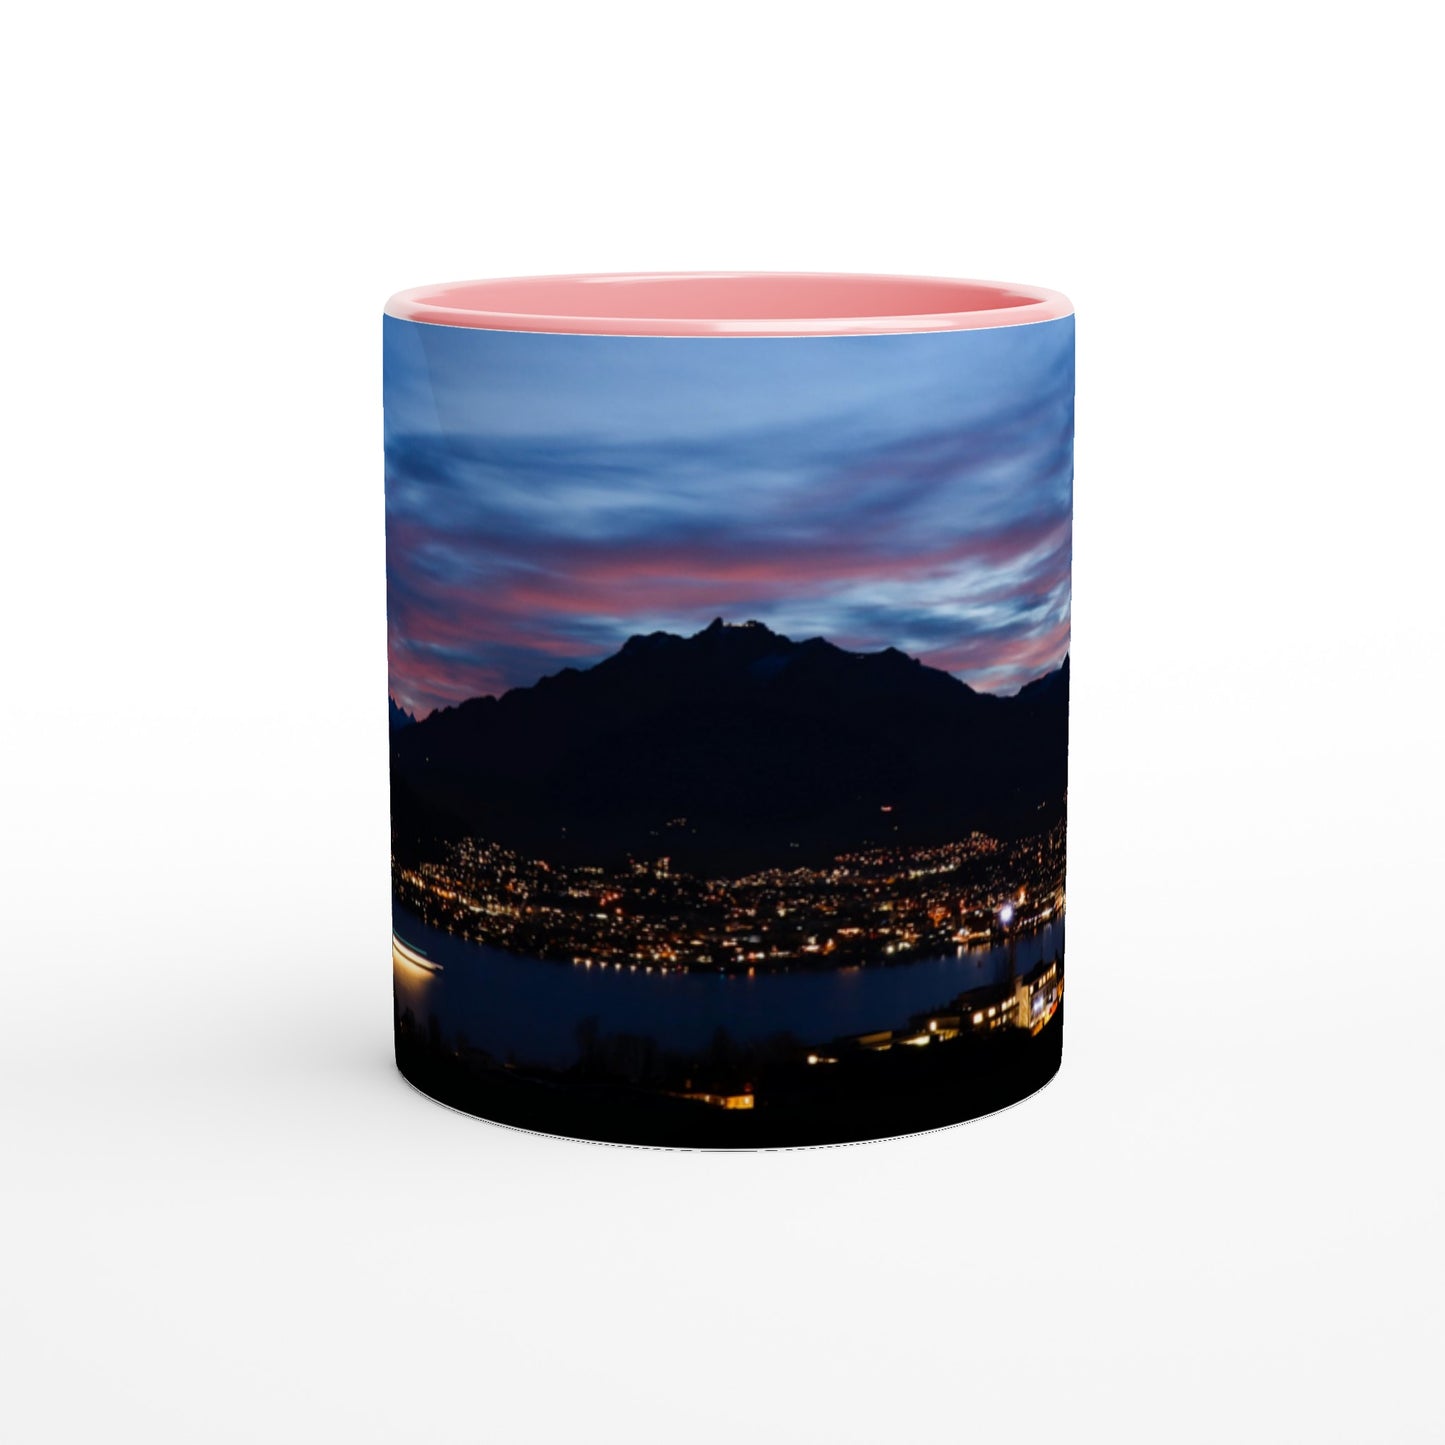 Lucerne night picture - ceramic cup with colored rim and handle